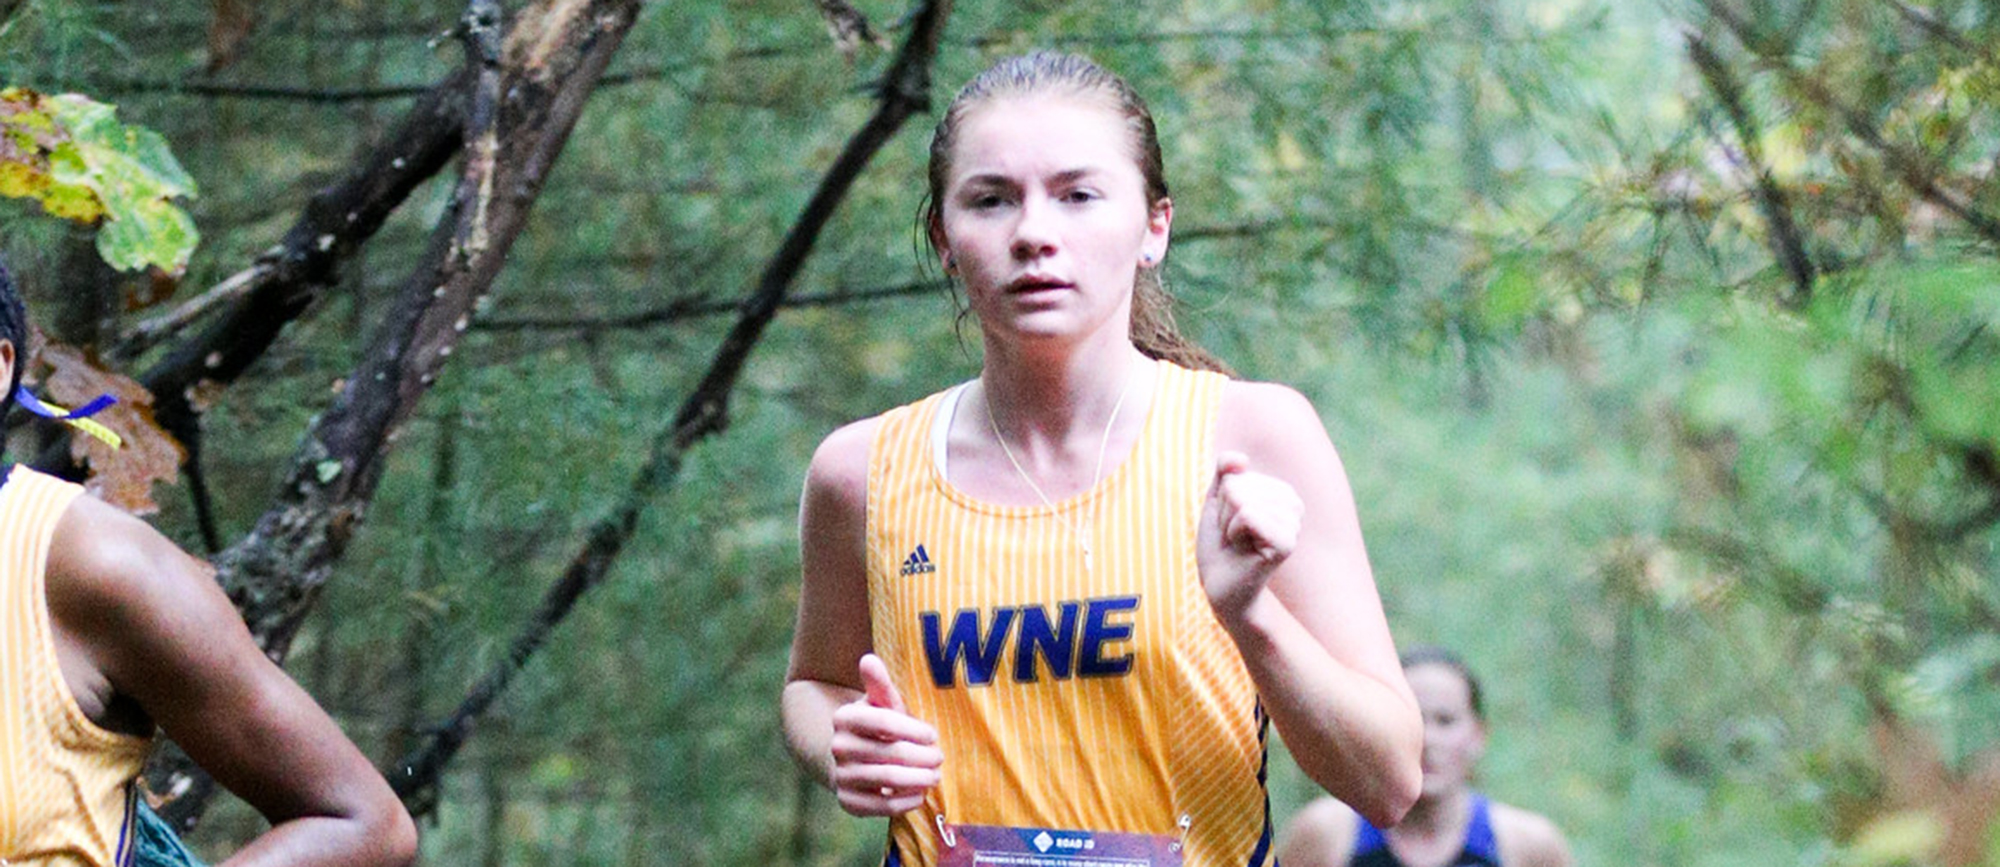 Women’s Cross Country Places 10th at Western New England Invitational